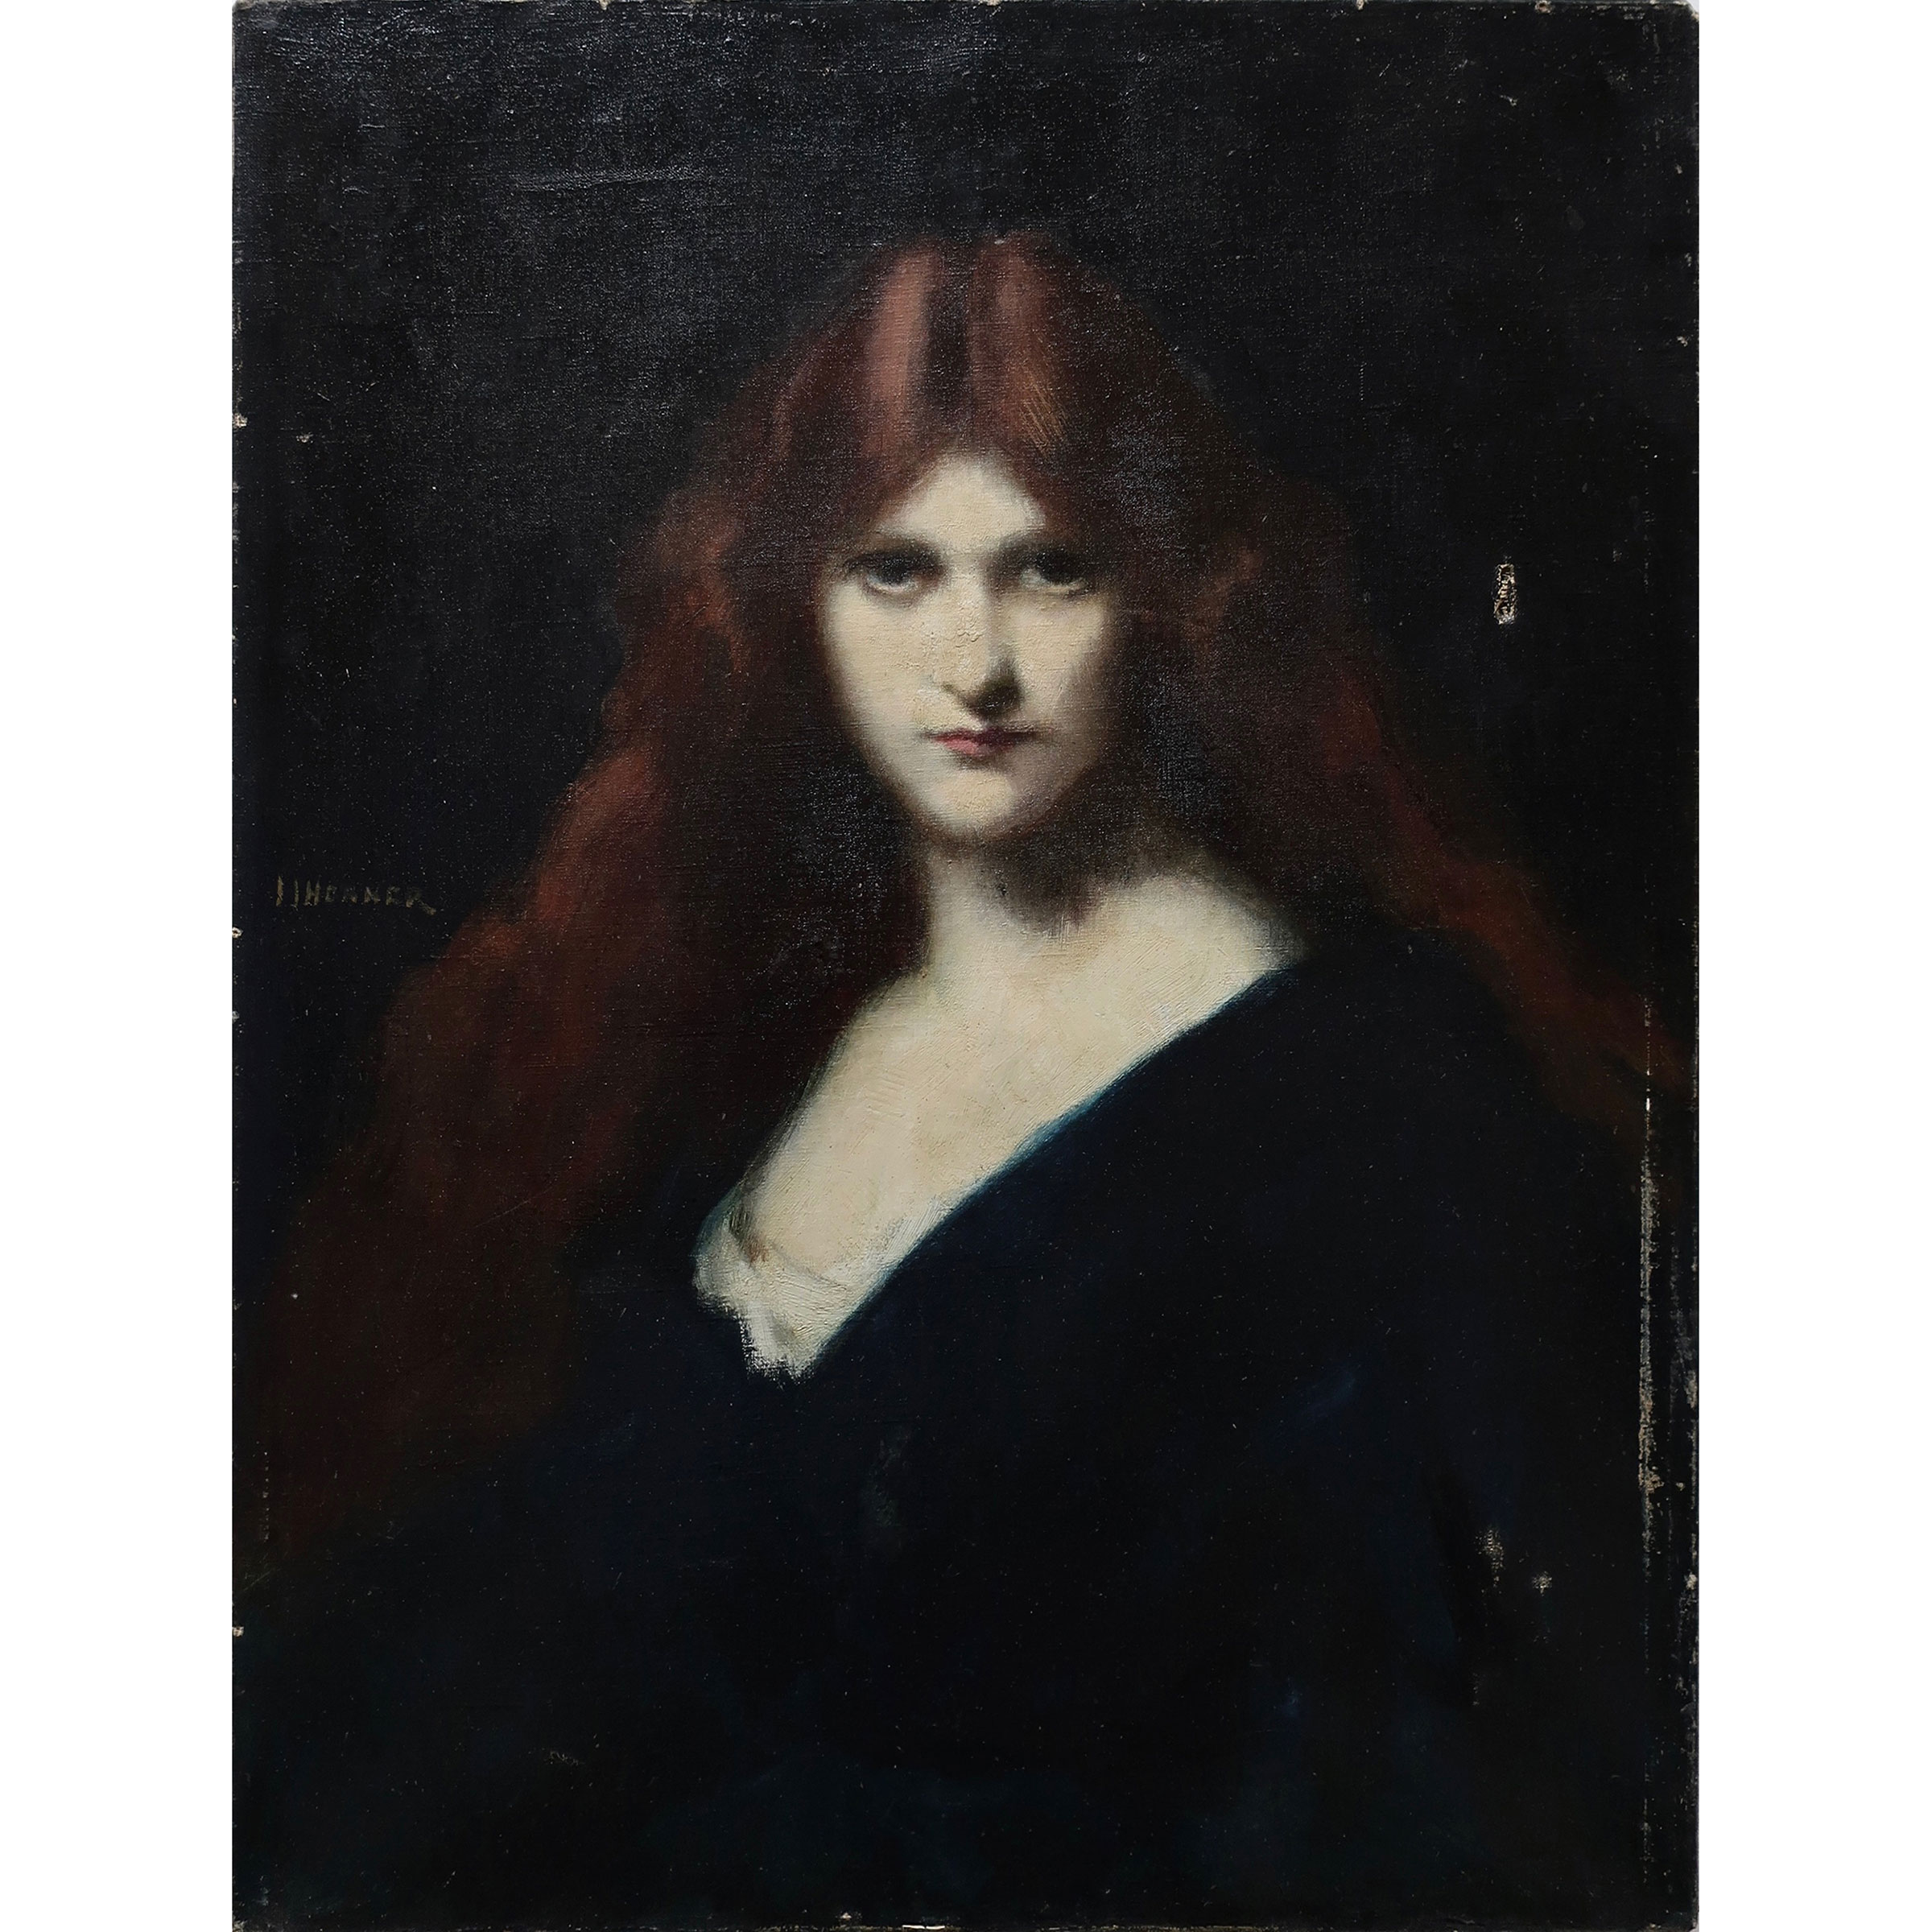 (MANNER OF) JEAN-JACQUES HENNER (FRENCH, 1829-1905) 